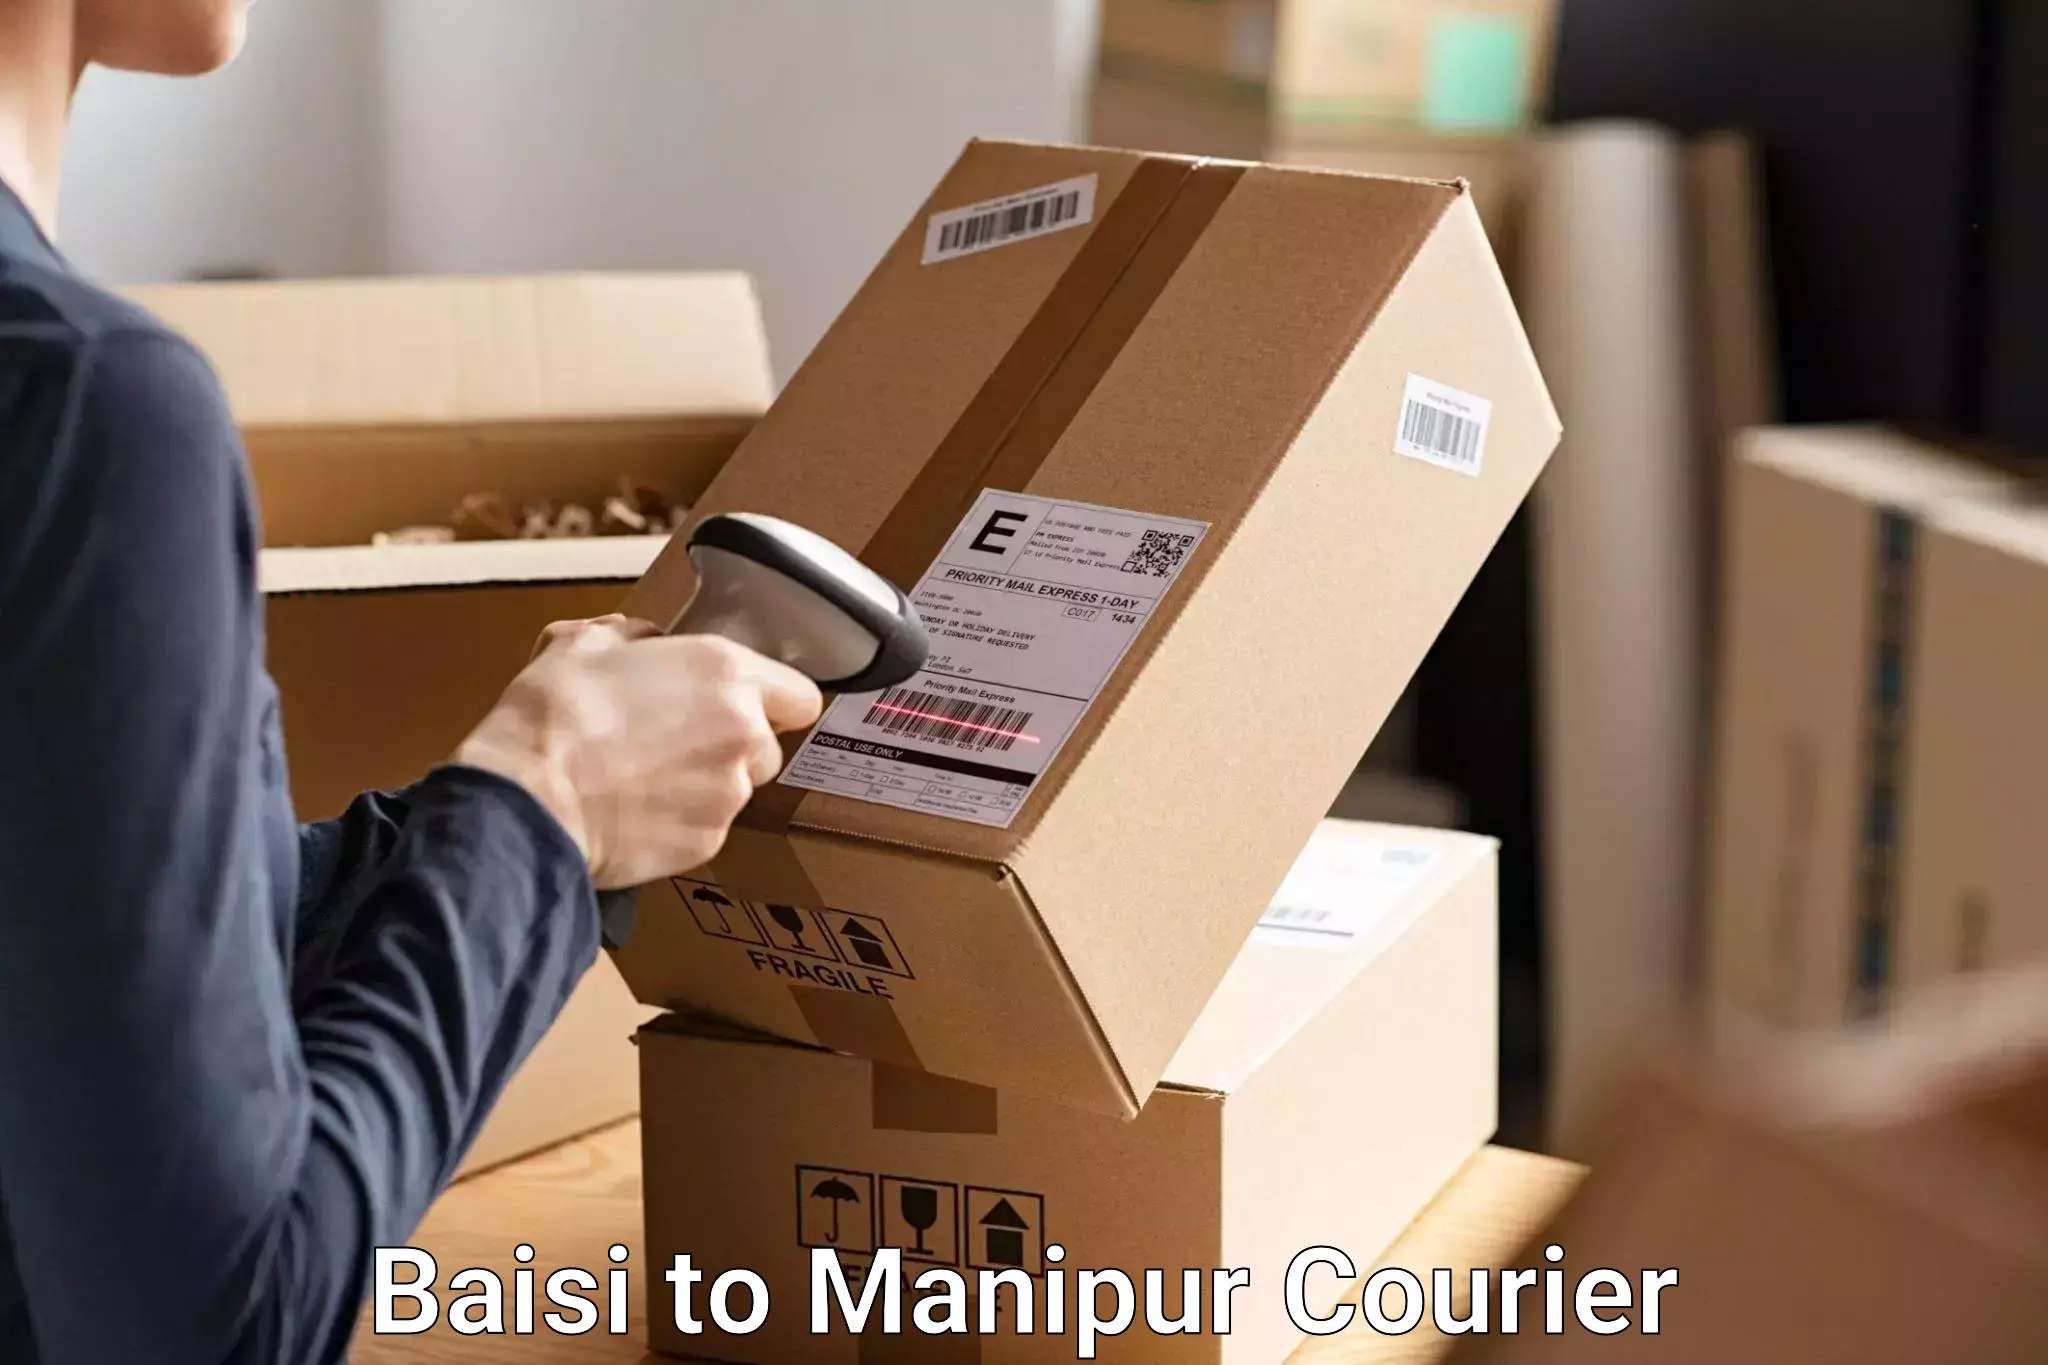 Luggage transport consultancy Baisi to Manipur